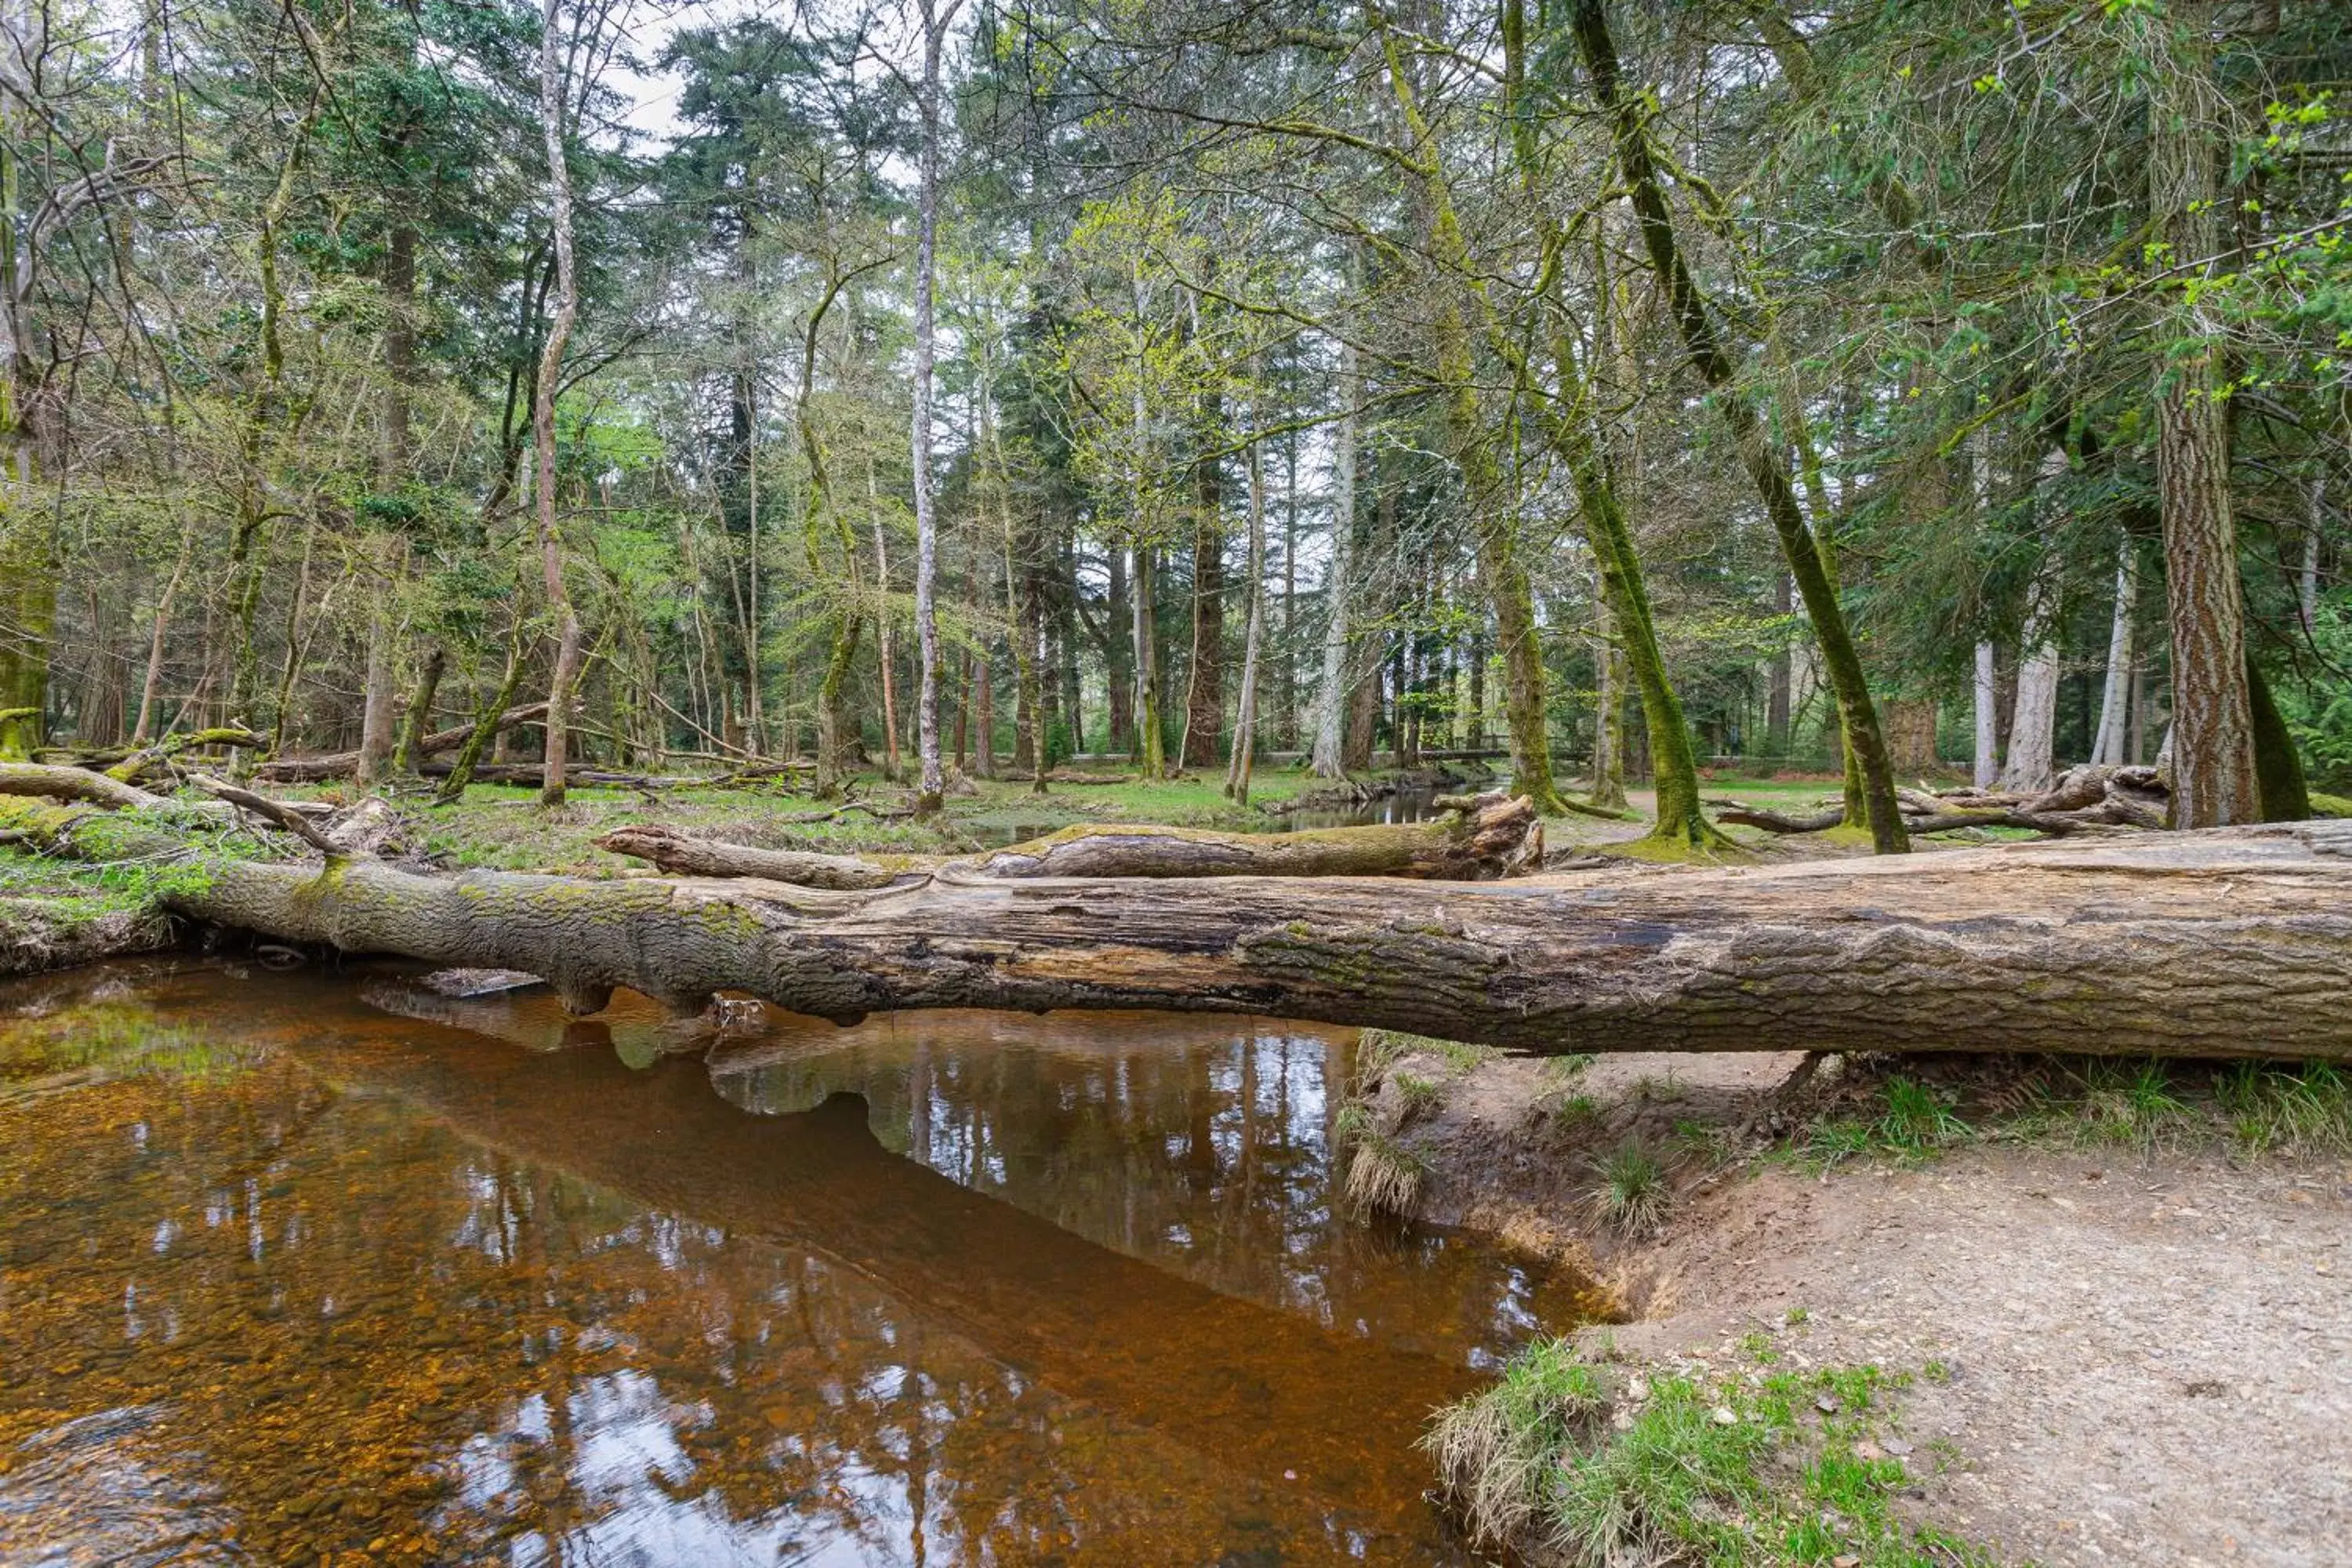 Location, Natural Landscape in Forest Park Country Hotel & Inn, Brockenhurst, New Forest, Hampshire